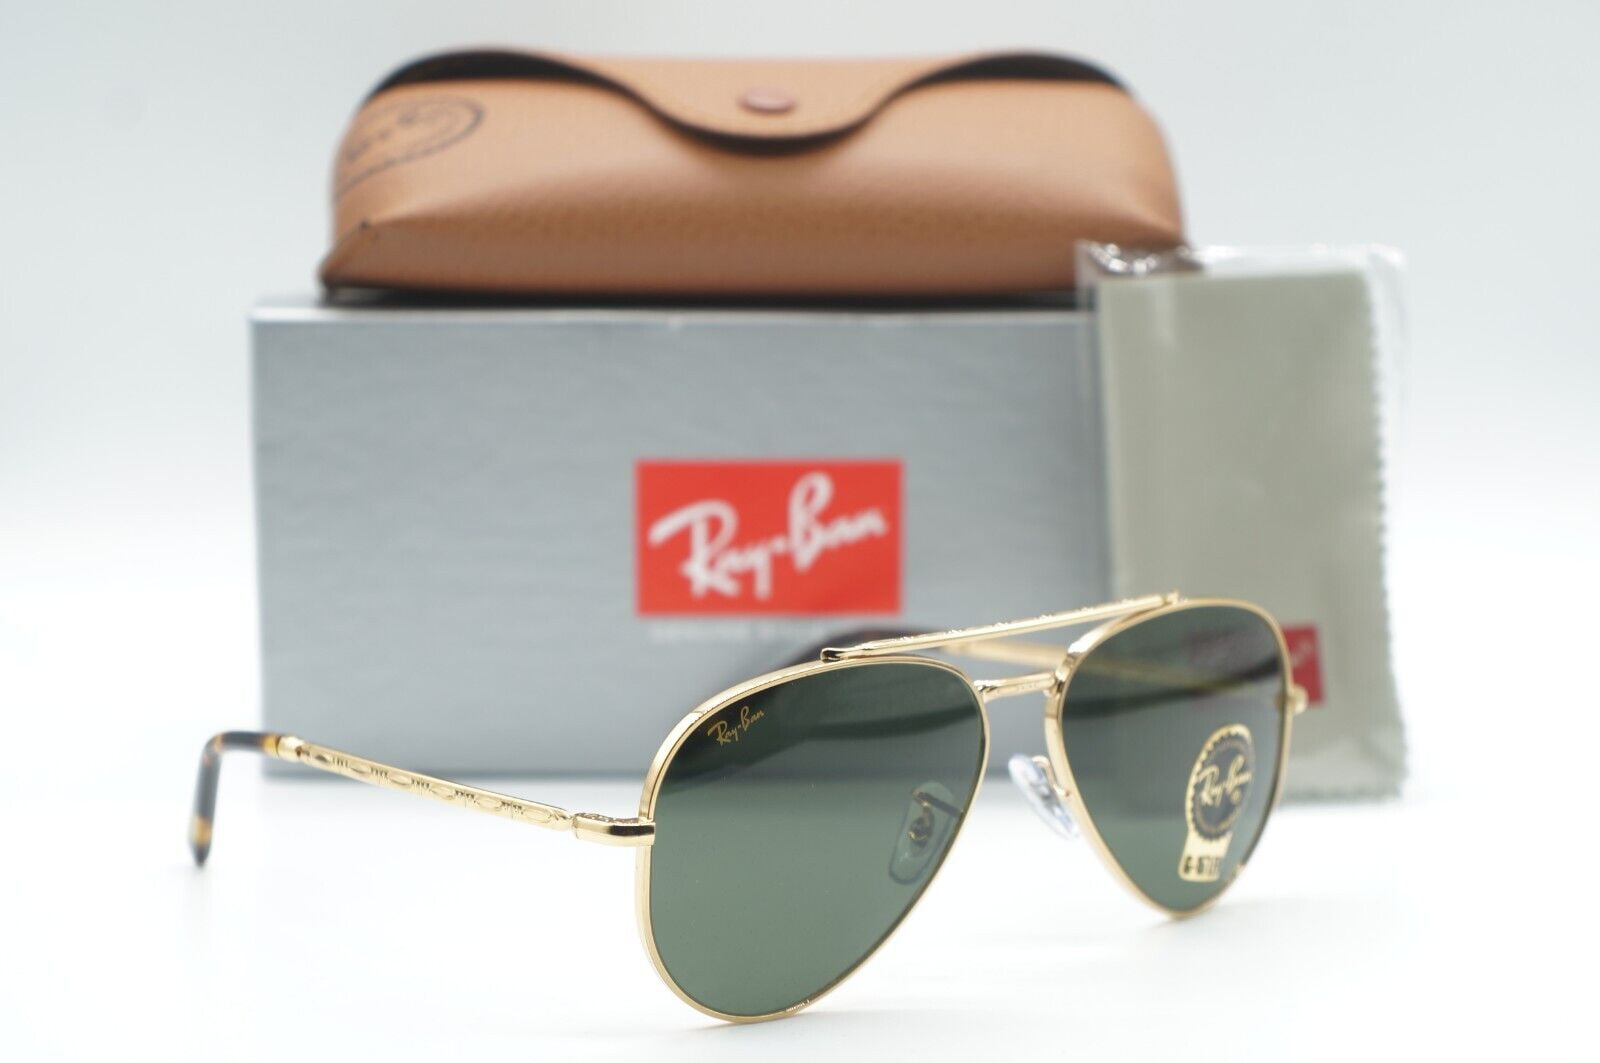 NEW RAY-BAN RB 3625 9196/31 GOLD POLARIZED AUTHENTIC FRAME SUNGLASSES 58-14  